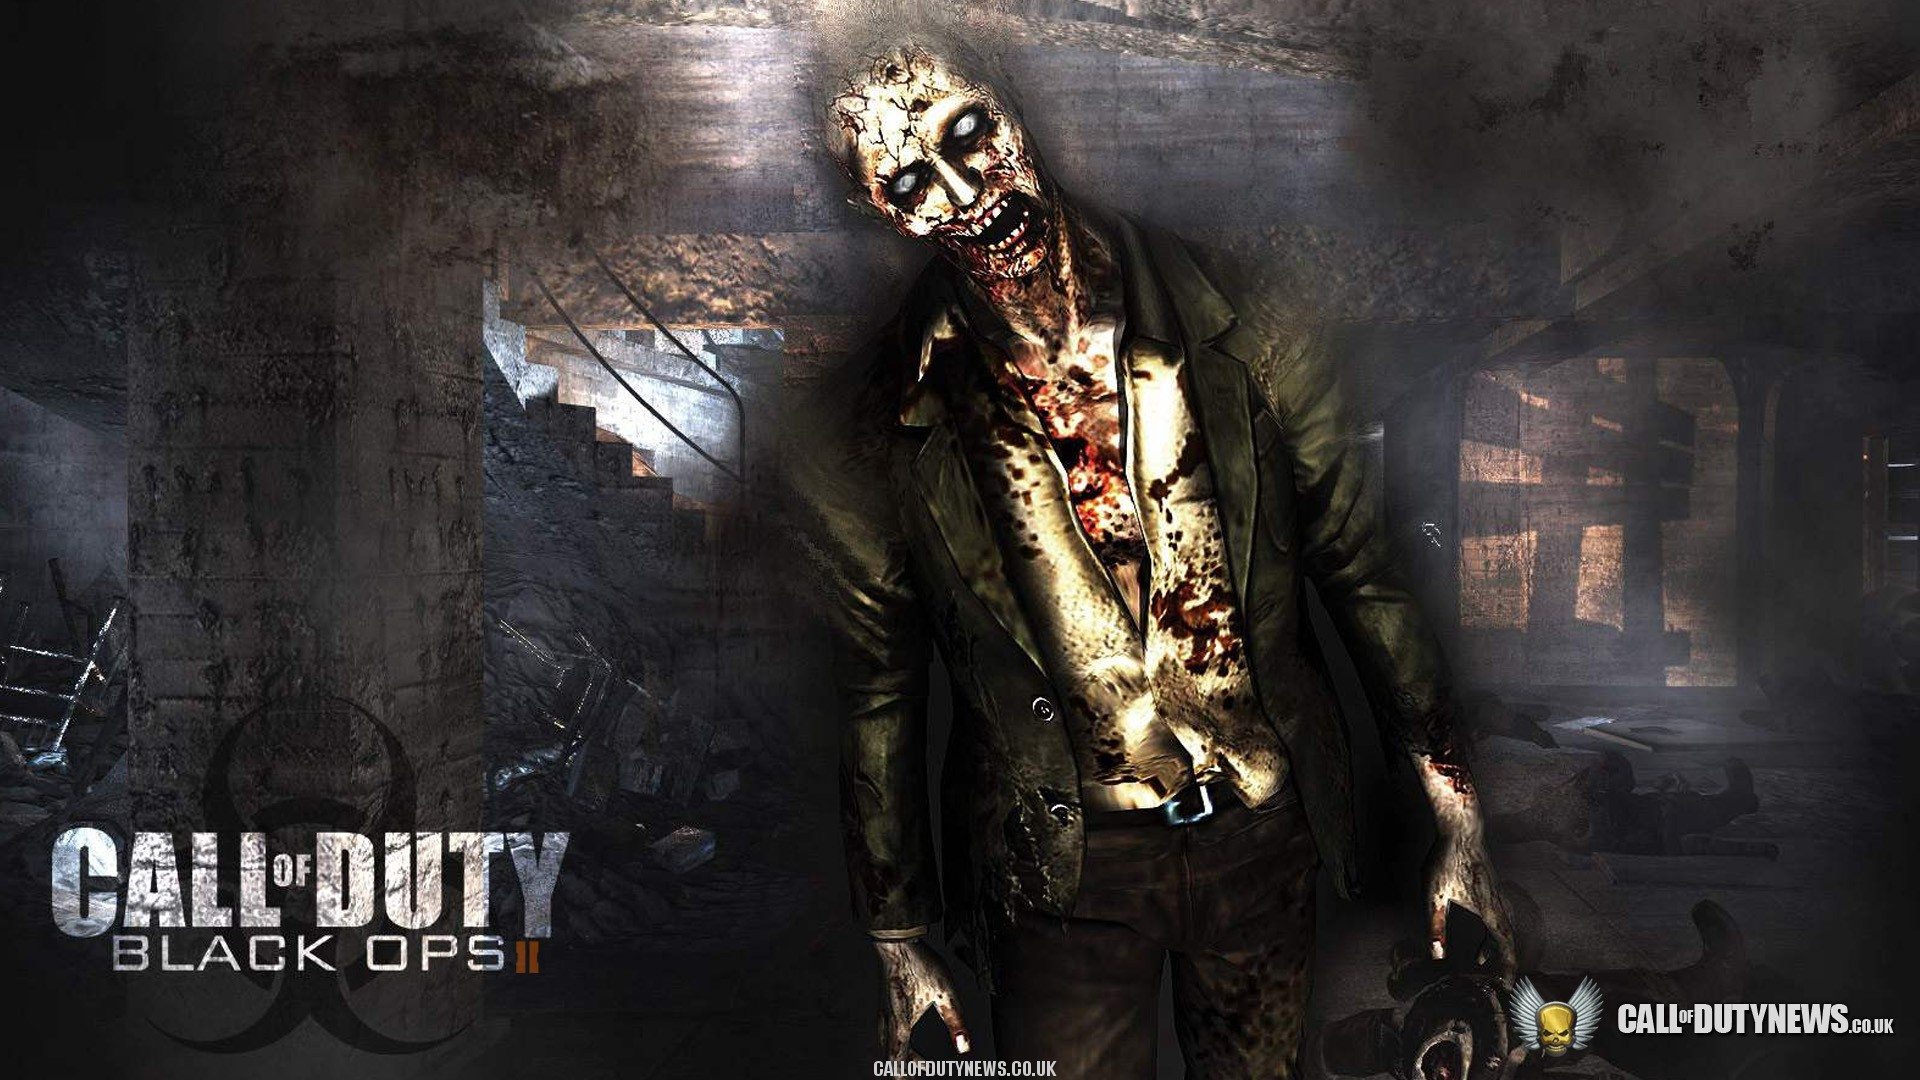 zombies in black ops 2 05 may 2012 category black ops 2 written by